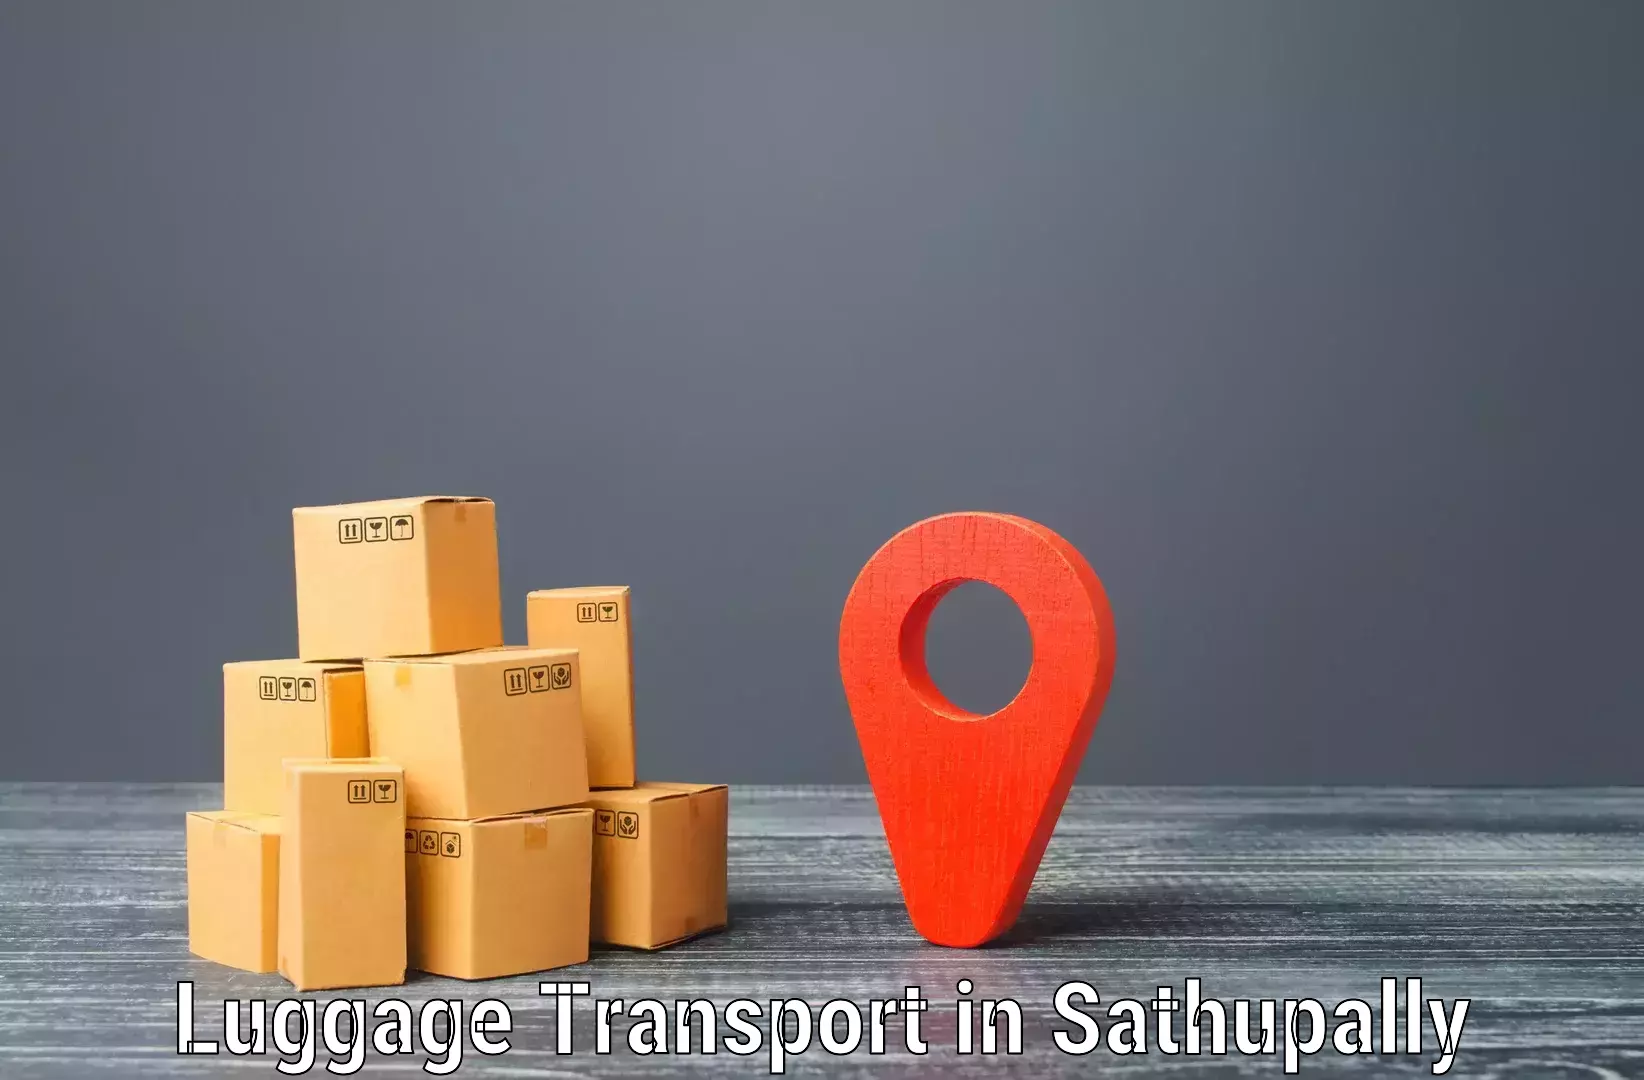 Luggage shipment processing in Sathupally